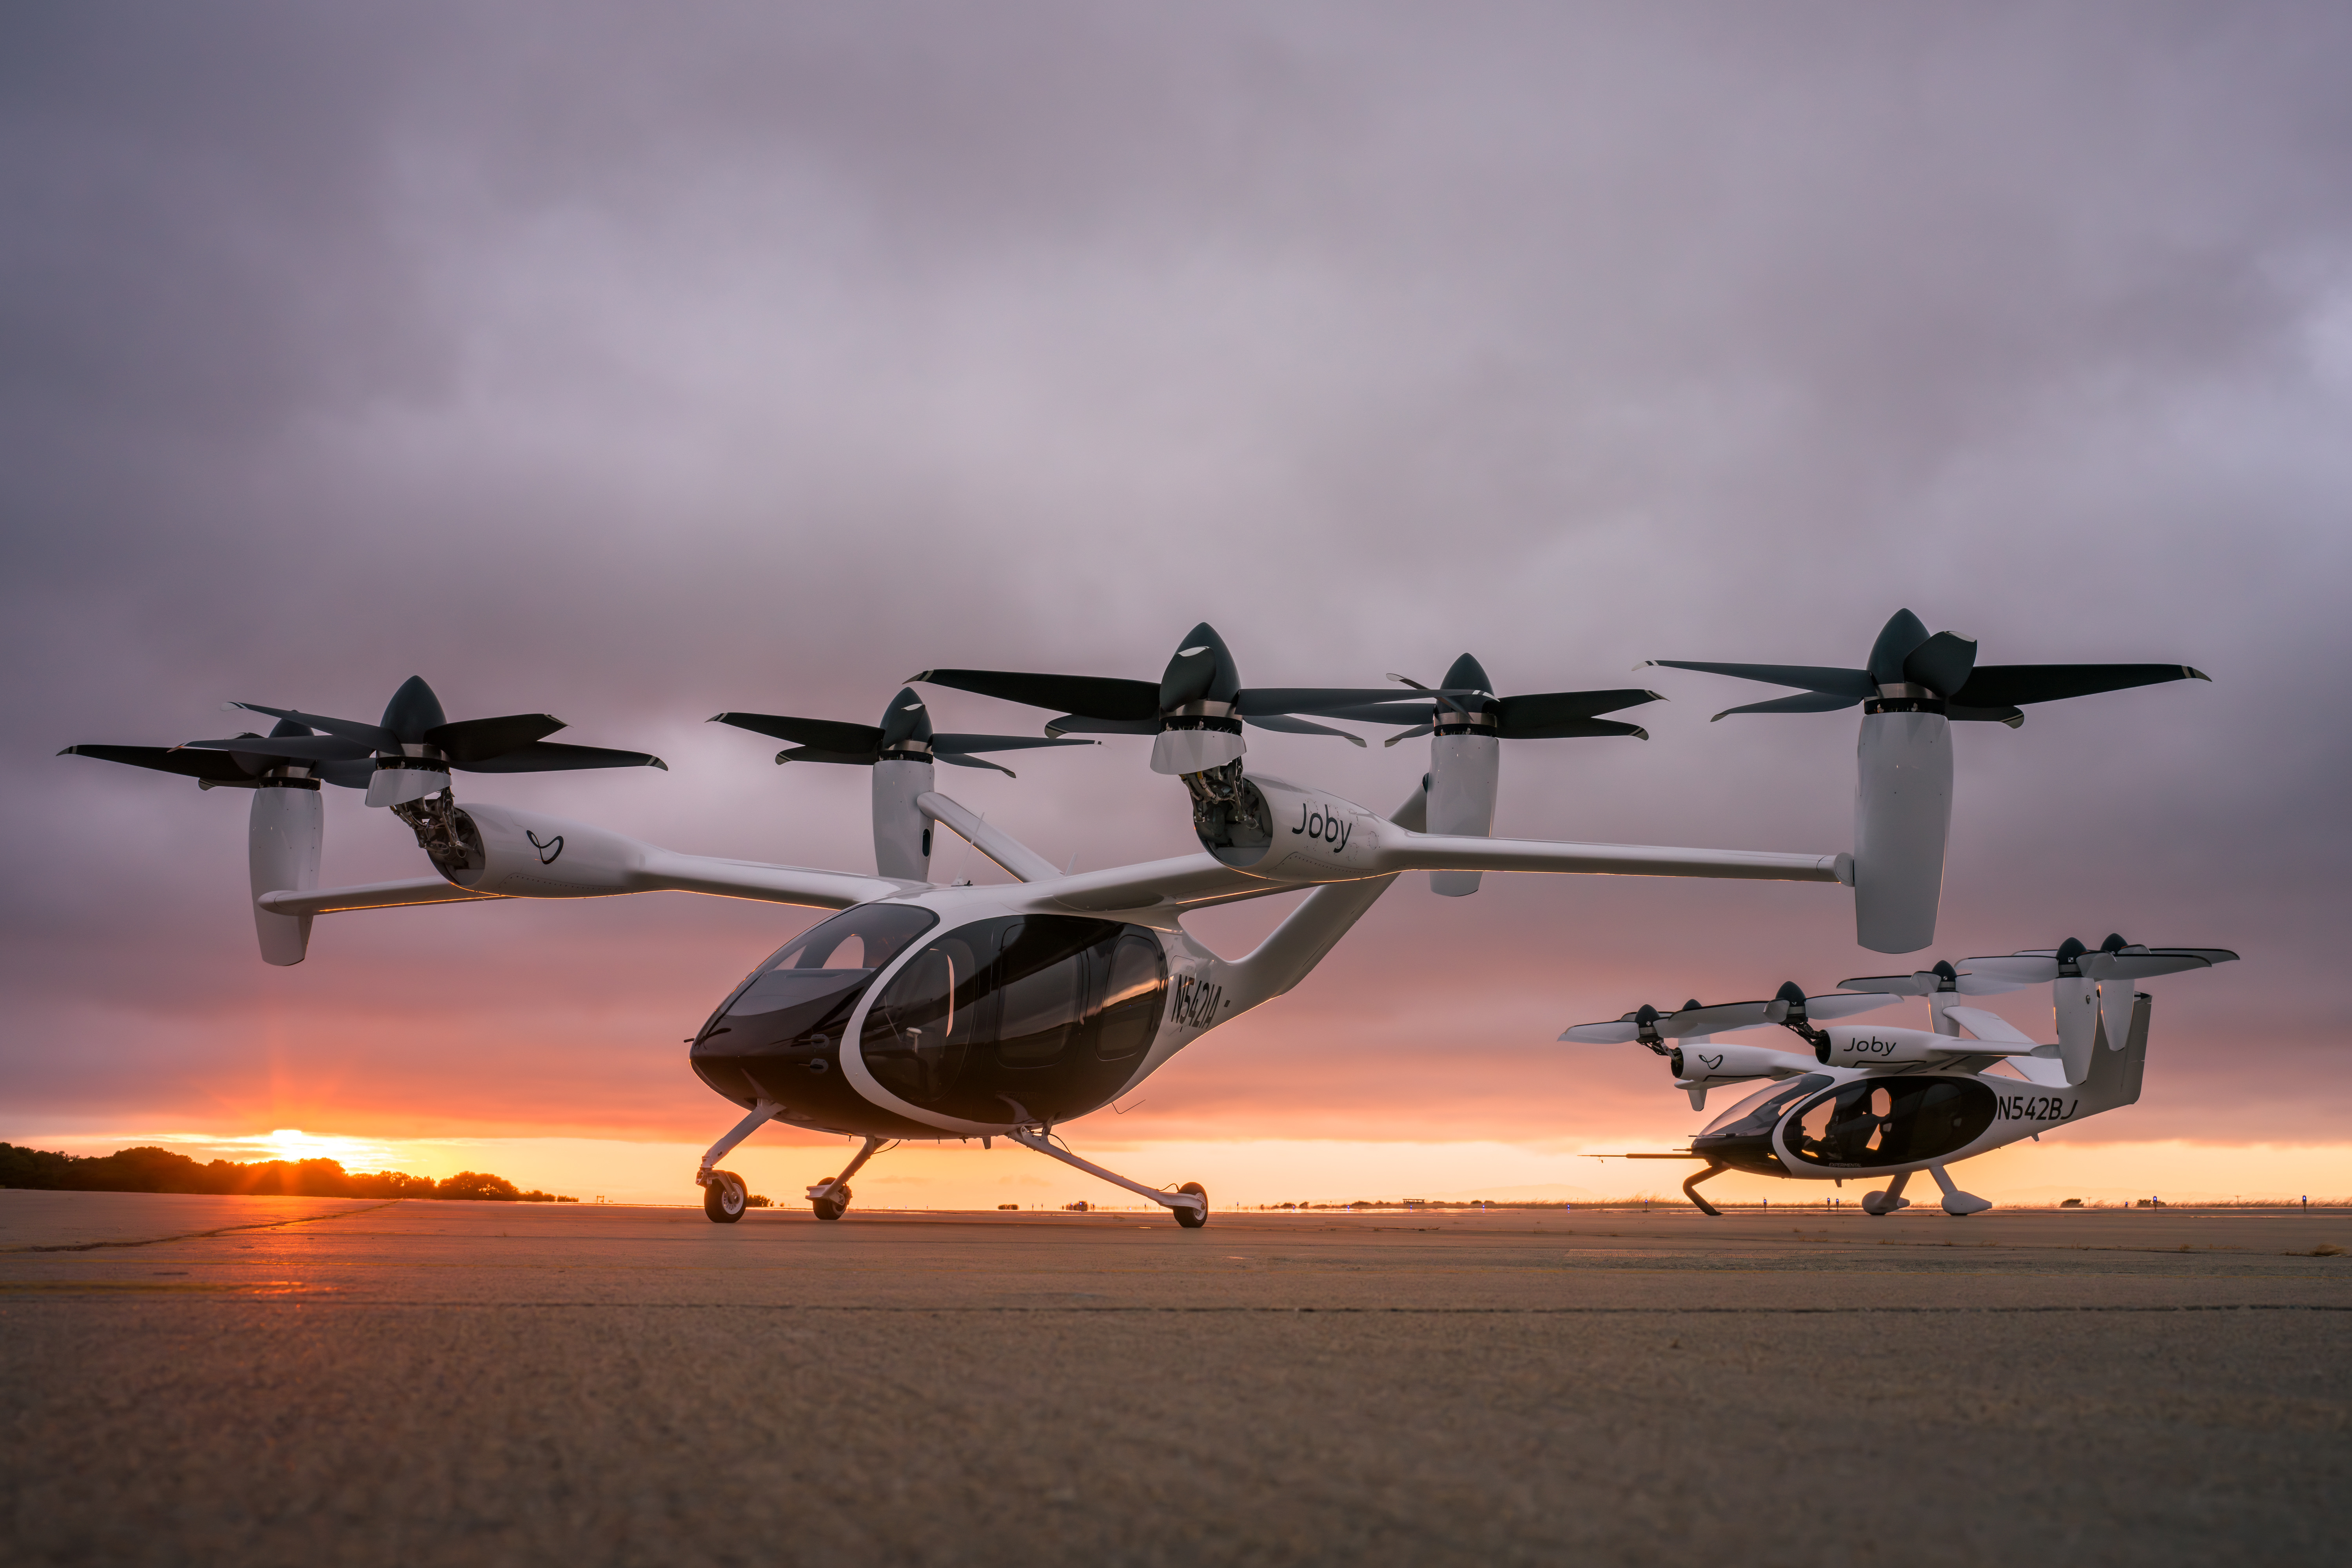 two joby aviation evtols set in front of a sunset